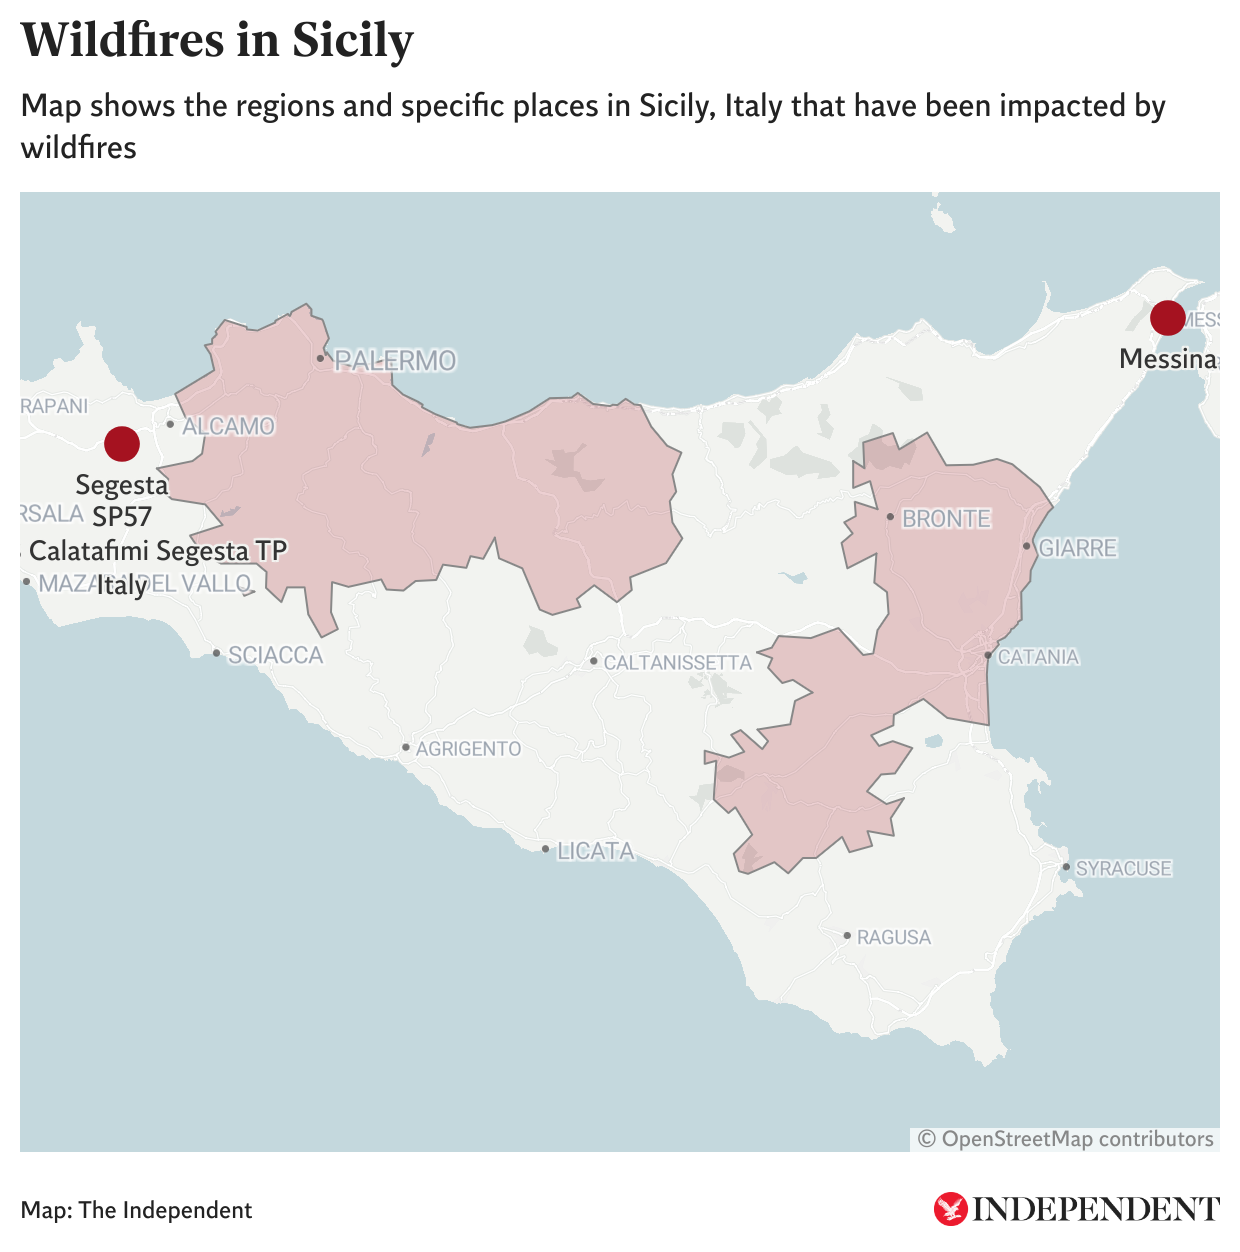 Map shows in red the regions and specific places impacted by wildfires in Sicily